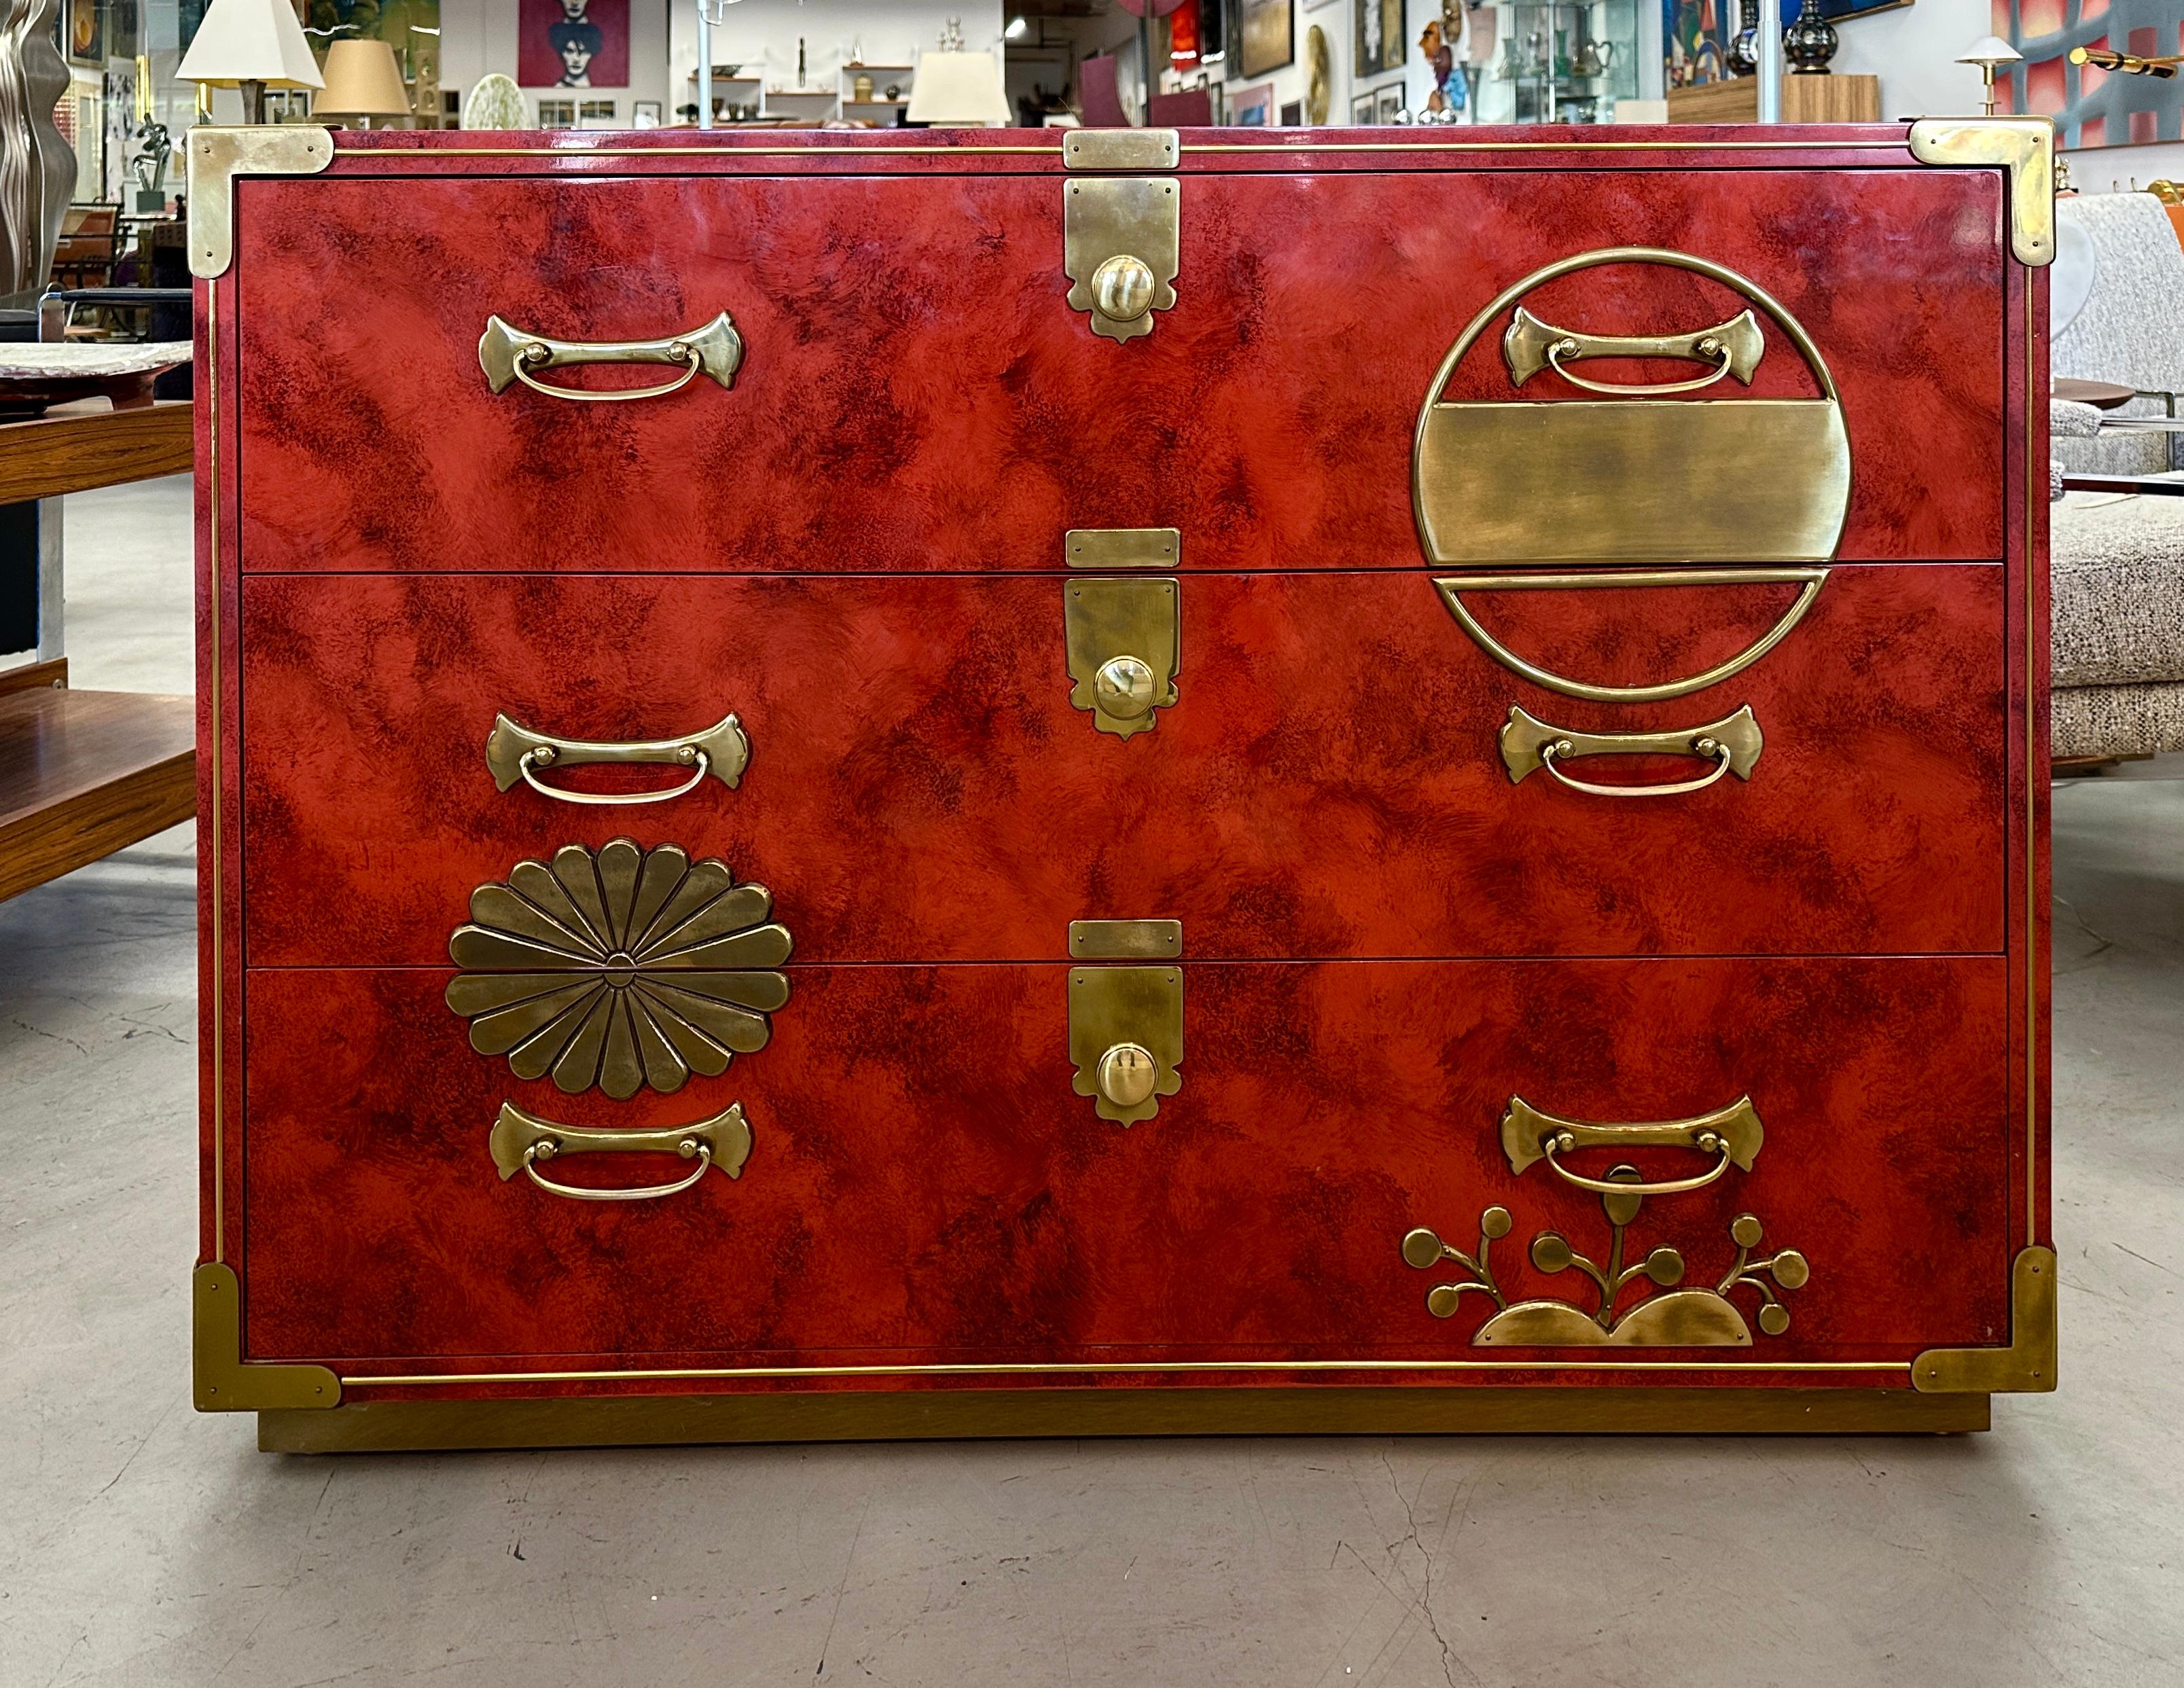 A stunning coral red lacquer chest by Mastercraft. It features beautiful brass fittings and  brass corner braces. It is sitting on a brass covered plinth base. Overall pretty Asian motif with oak secondary woods. Great overall Mastercraft quality,